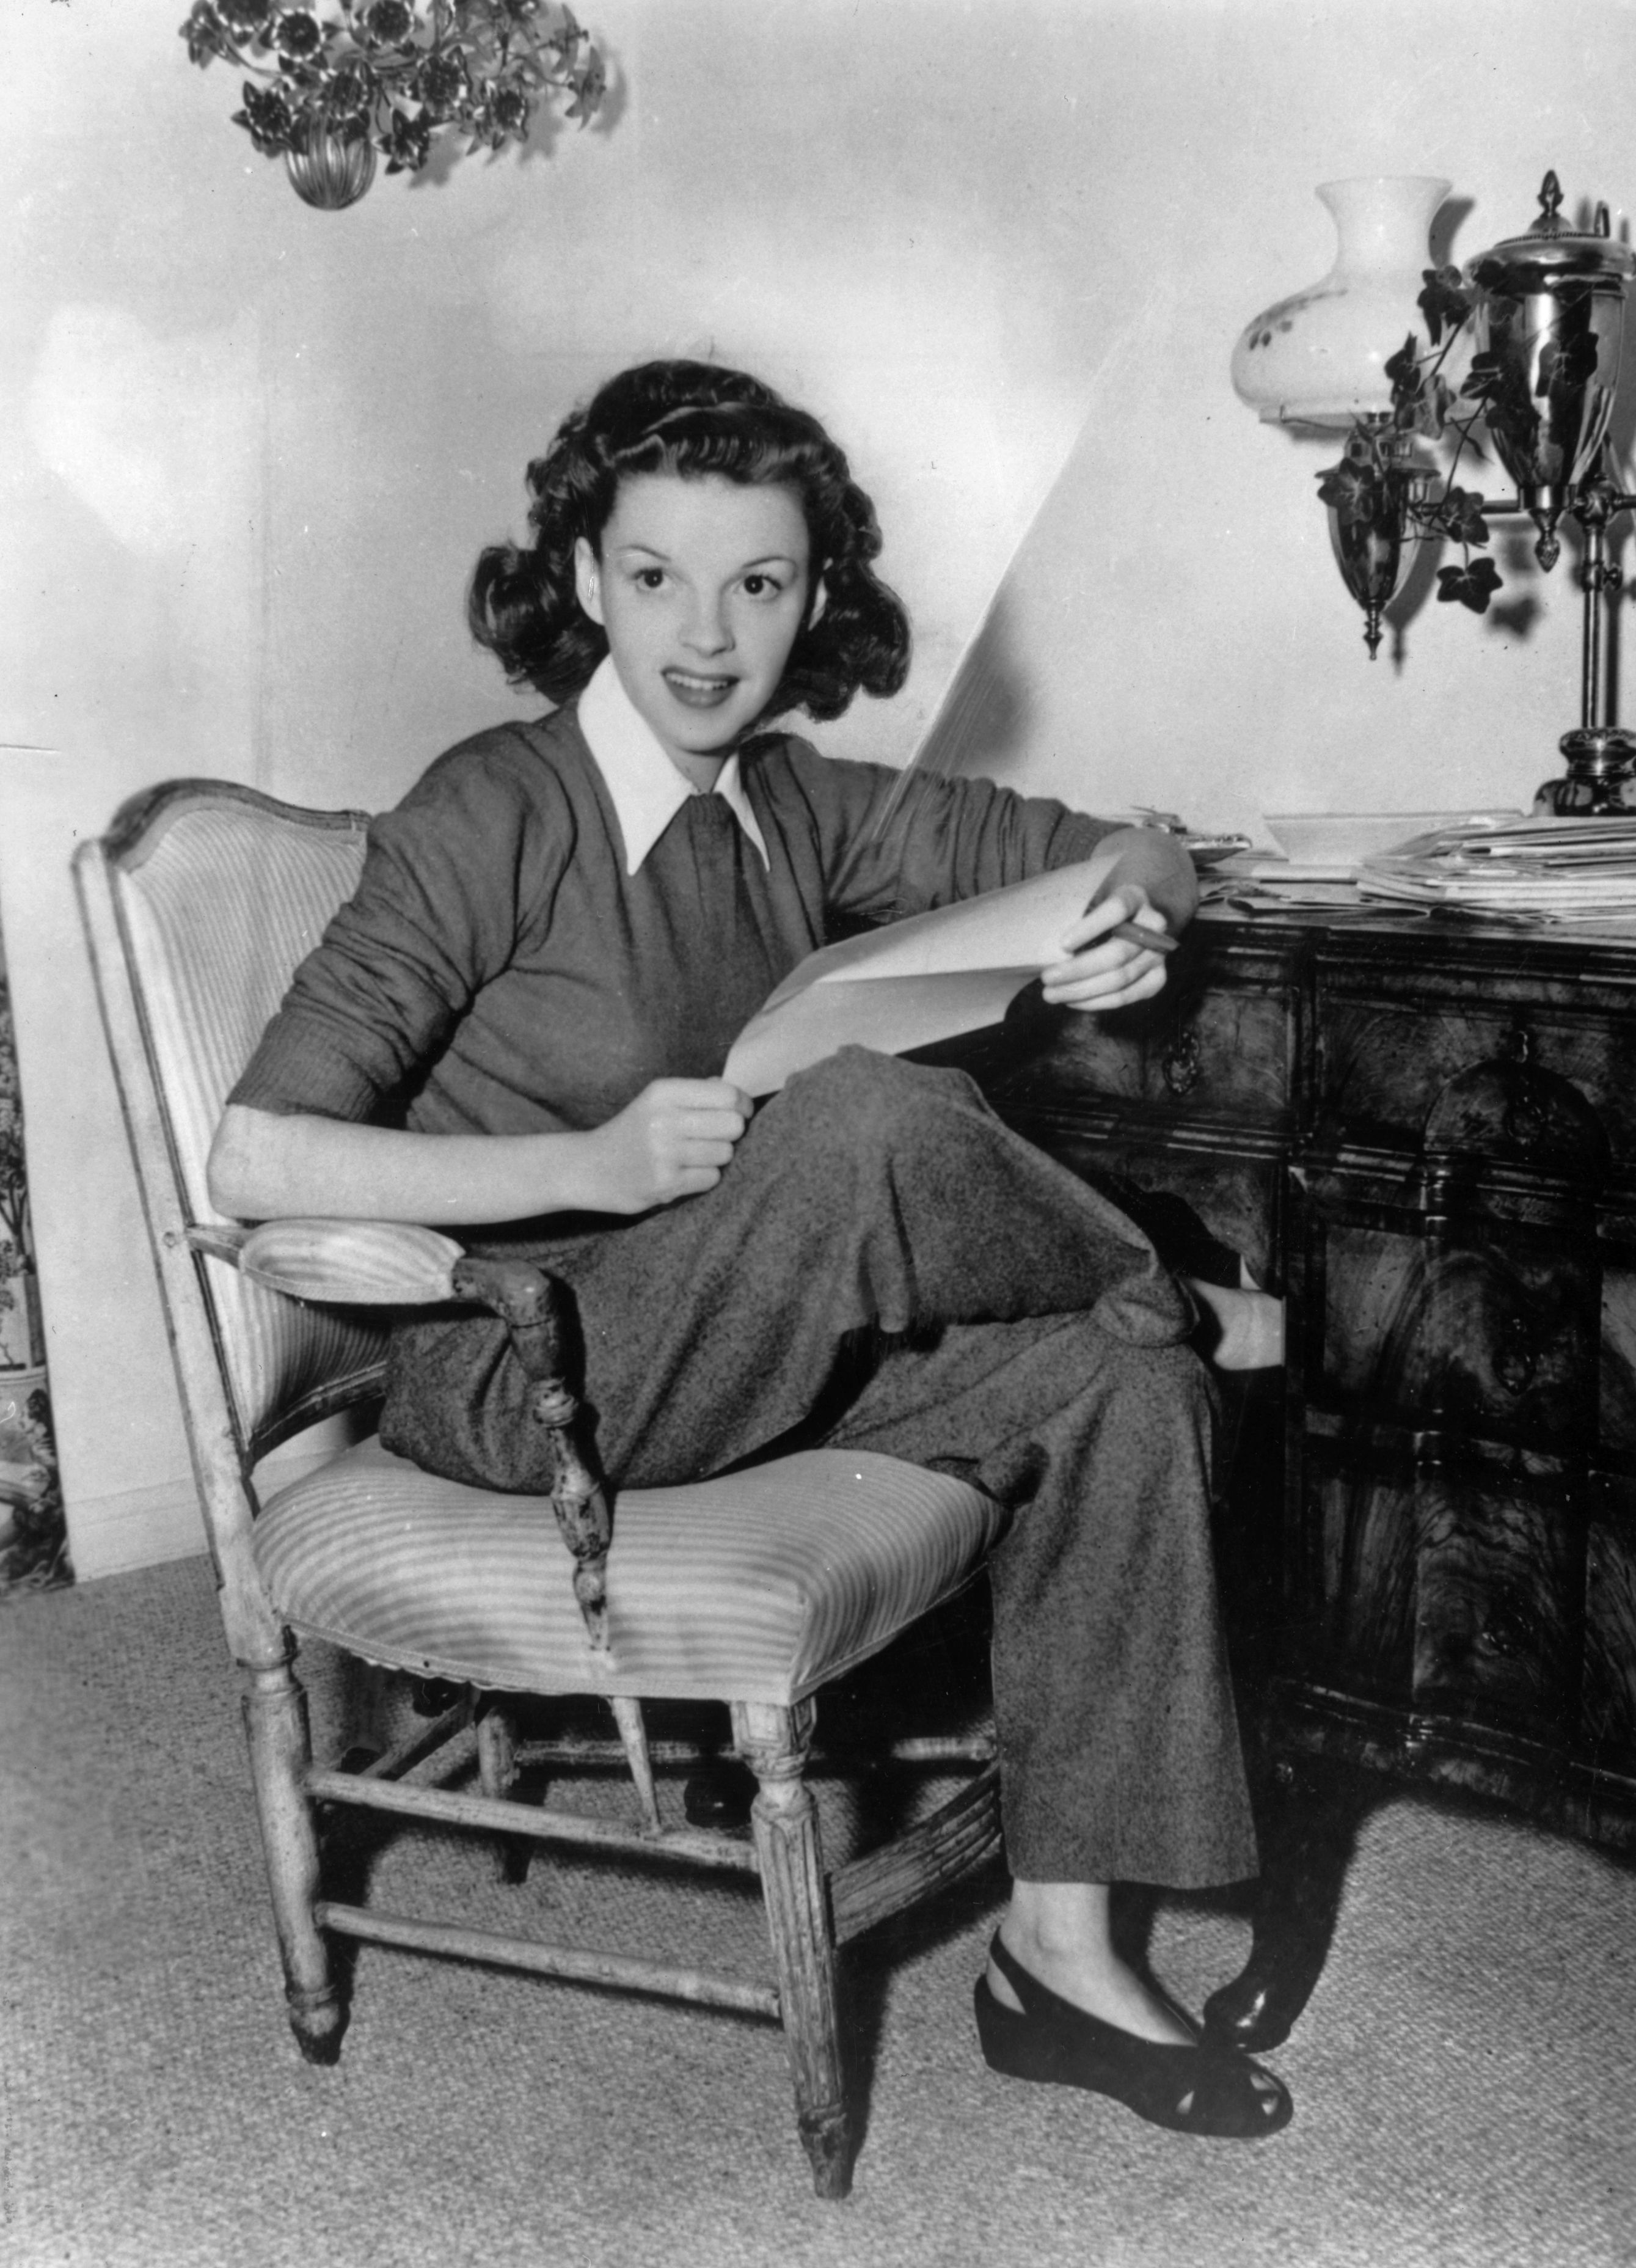 Judy Garland (Frances Ethel Gumm, 1922 - 1969) at home answering fan mail. | Source: Getty Images